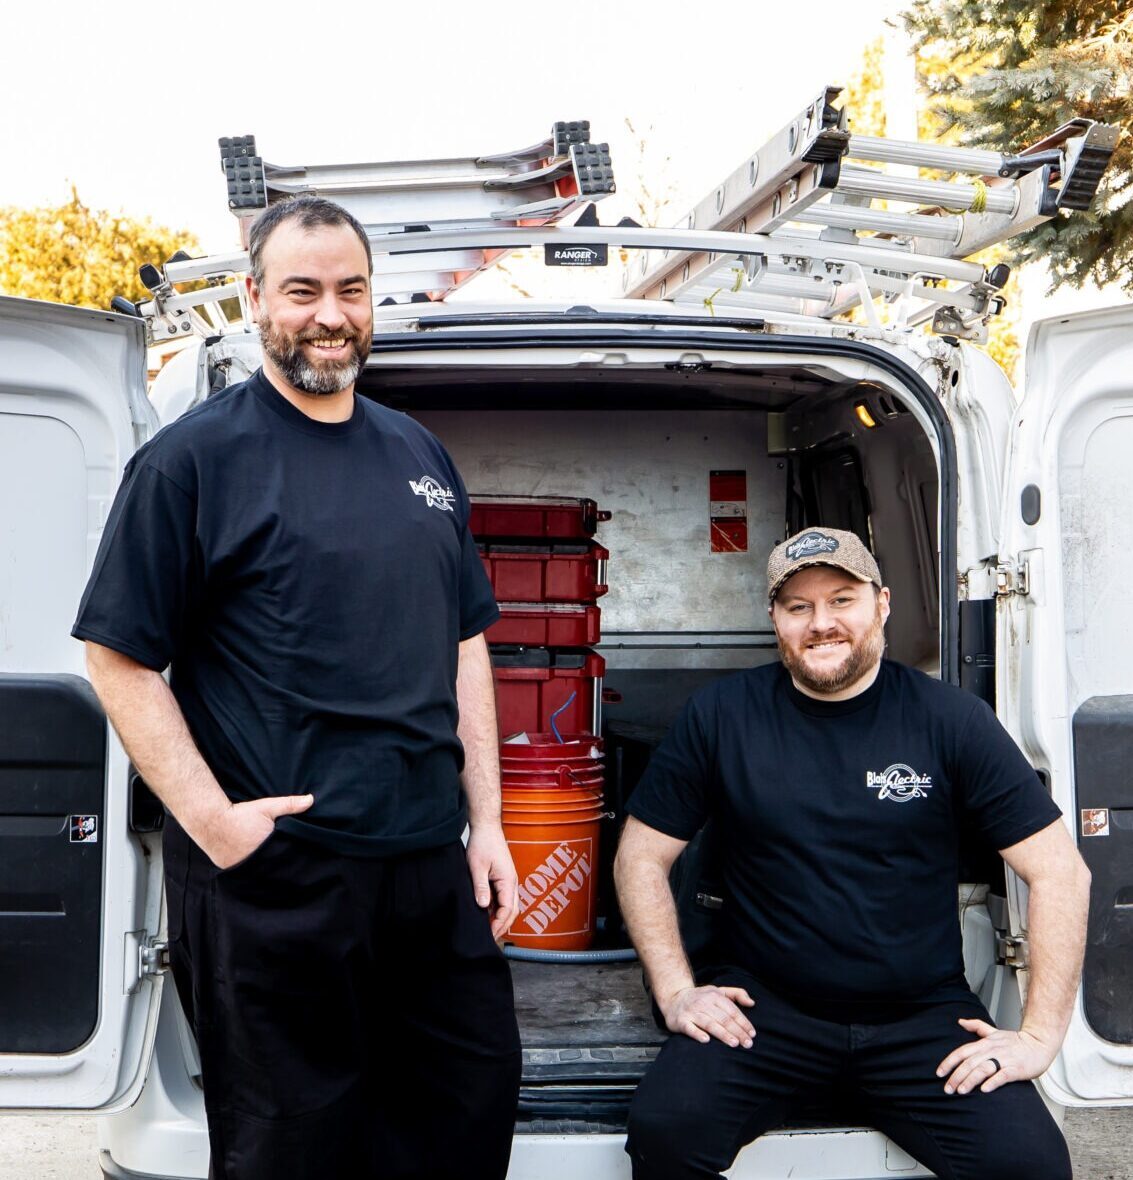 Two smiling persons in black shirts with company logos stand beside an open van filled with work equipment and red containers on a sunny day.